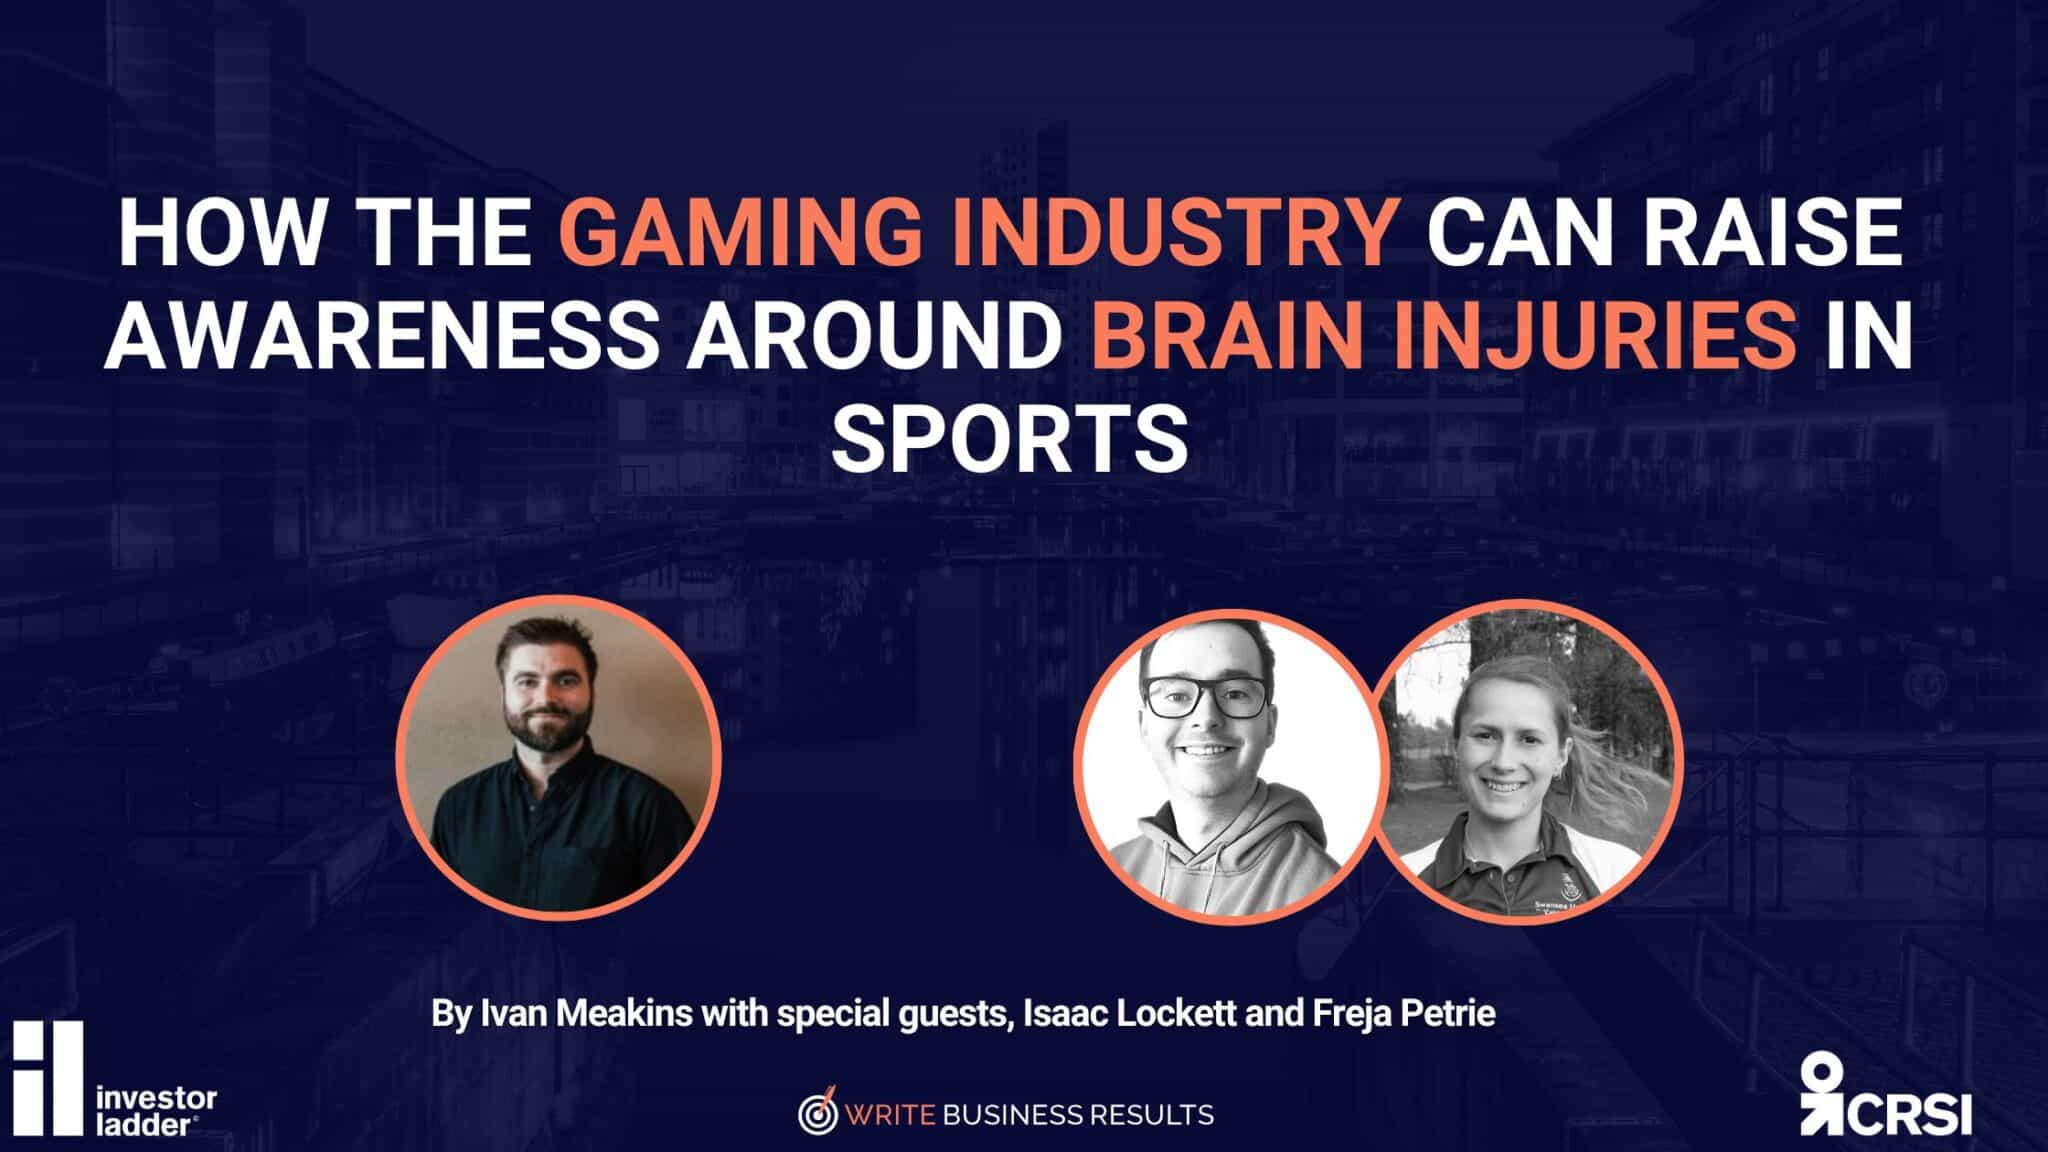 How The Gaming Industry Can Raise Awareness Around Brain Injuries In Sports